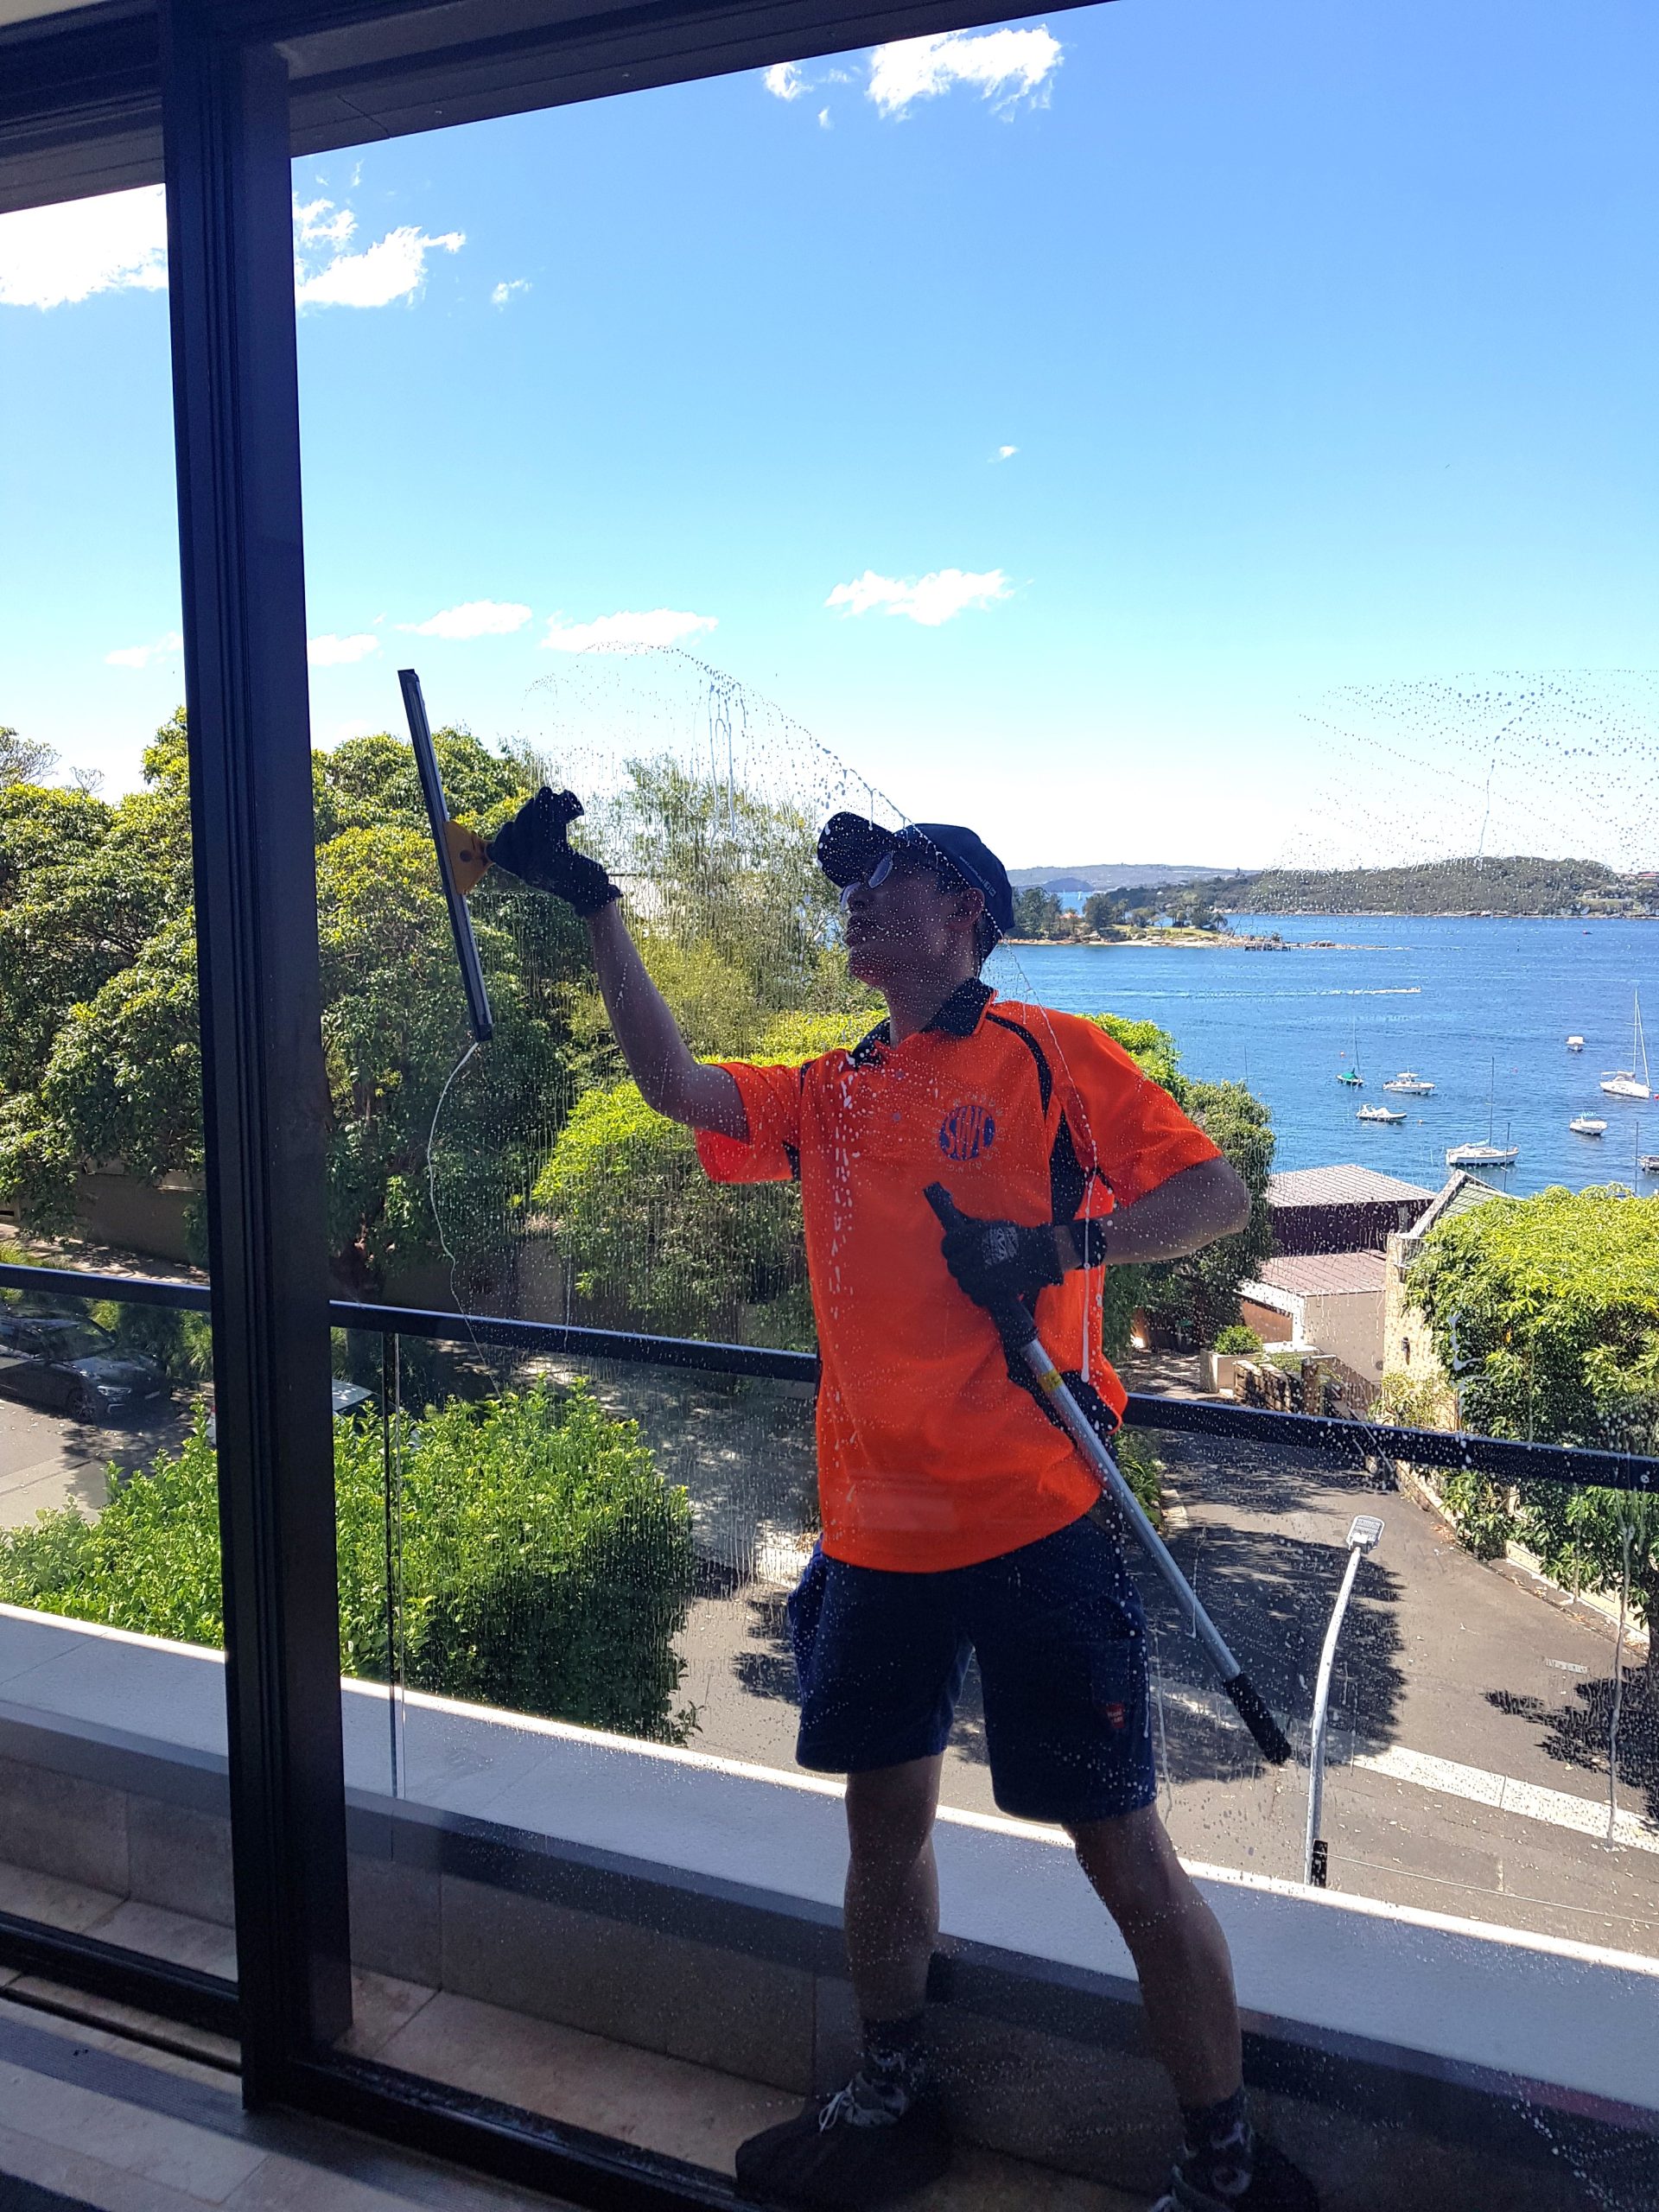 SWC Sydney Window Cleaning #1 Residential Service Since 2012